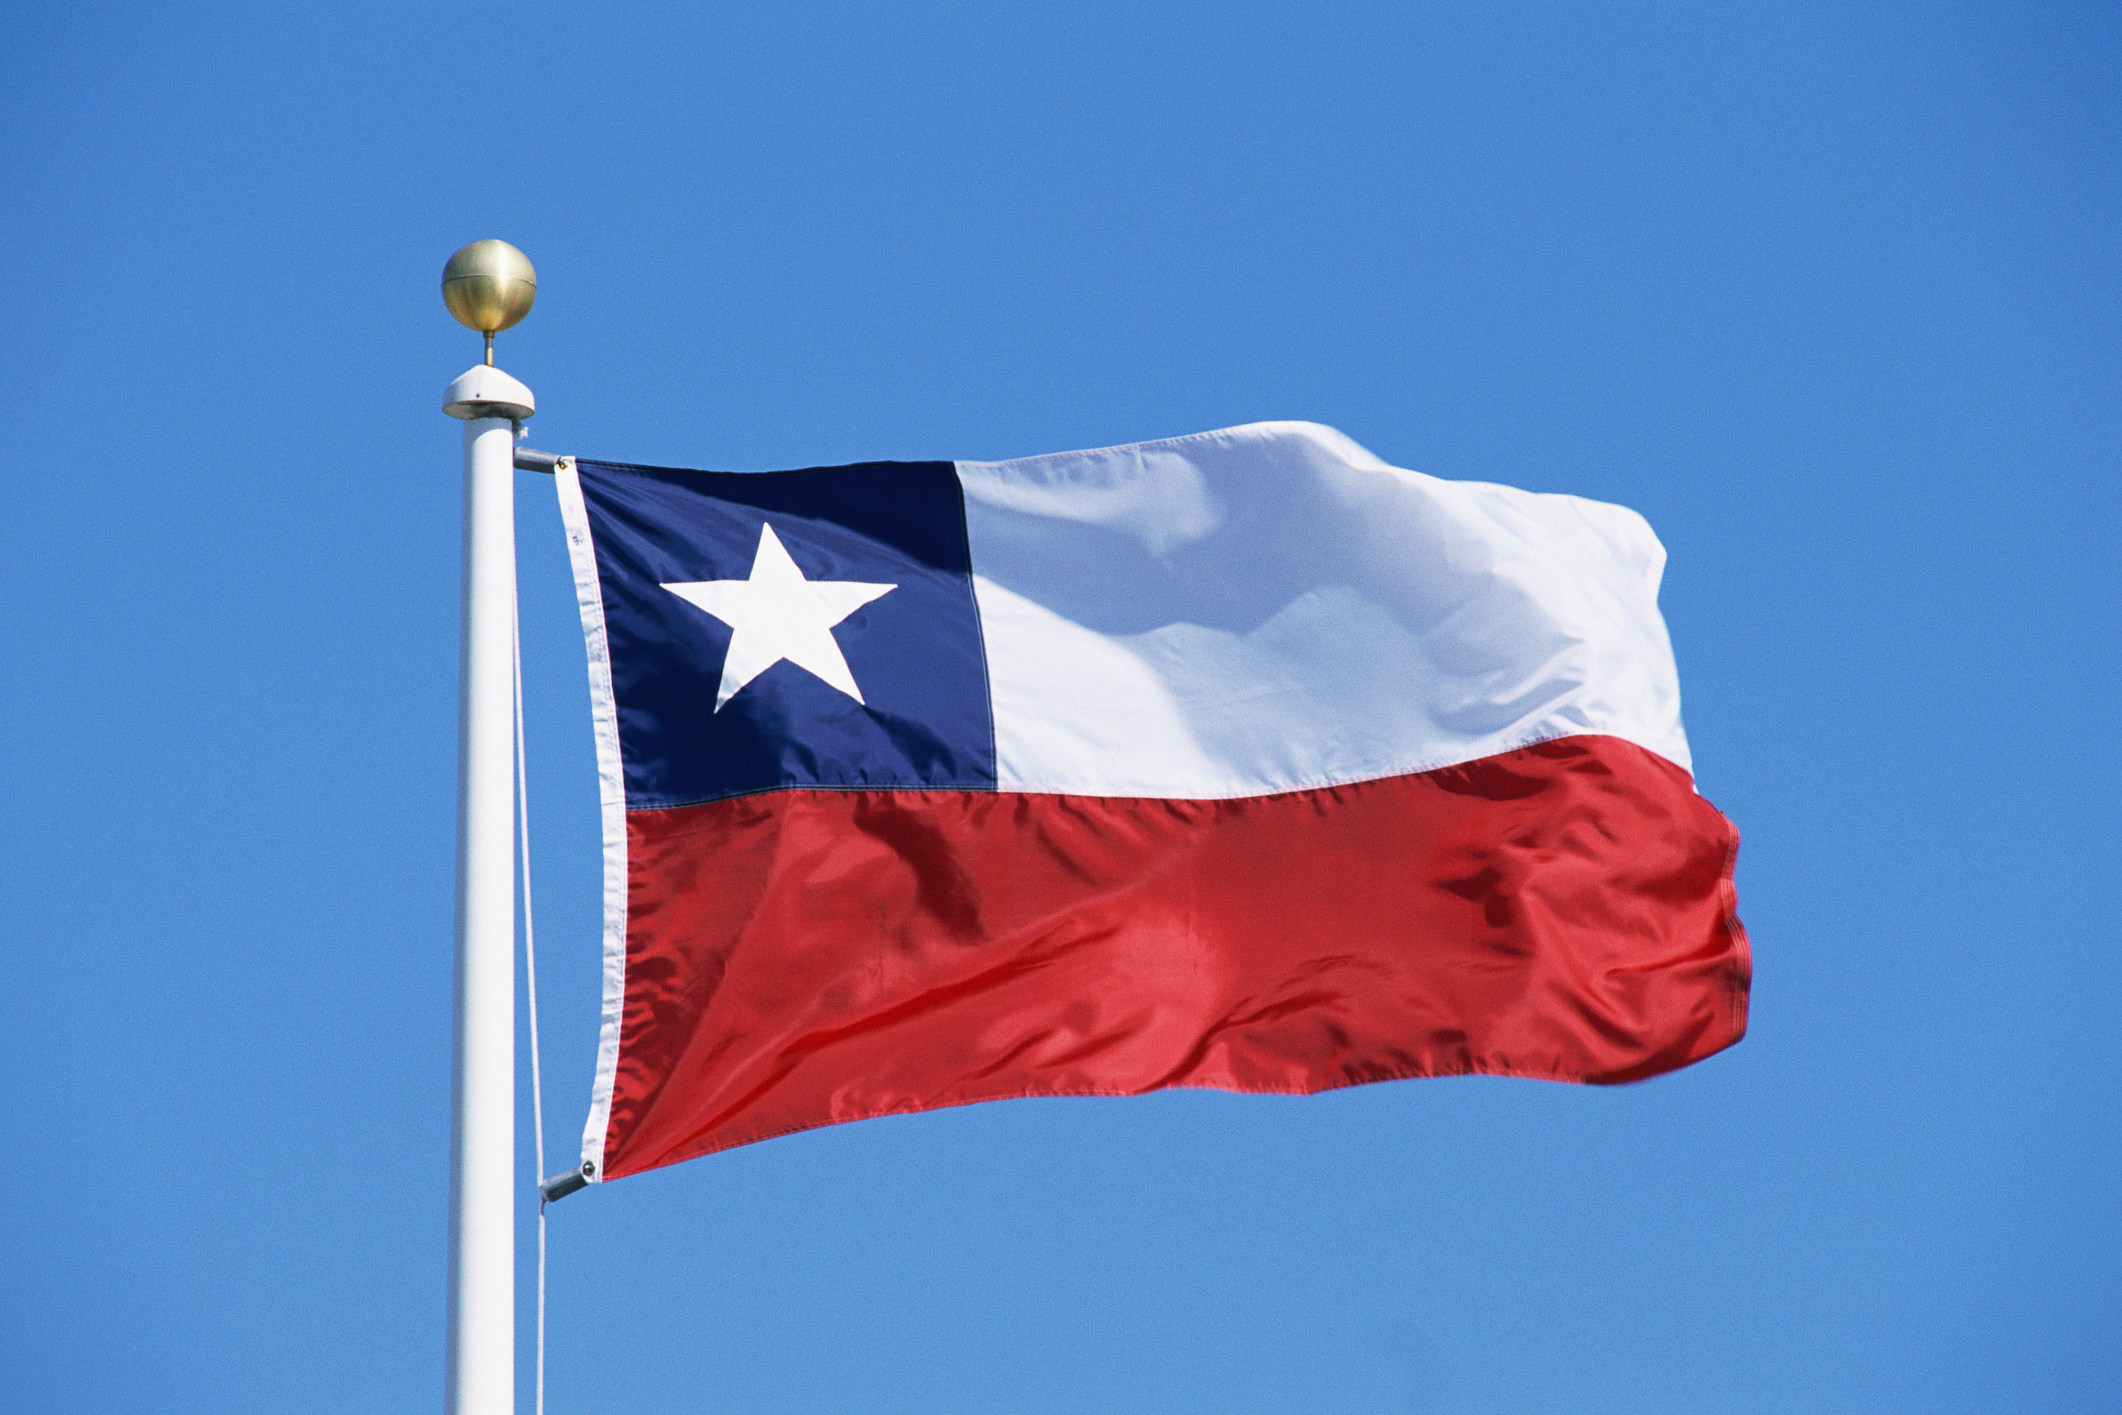 Image of the Chile national flag. 